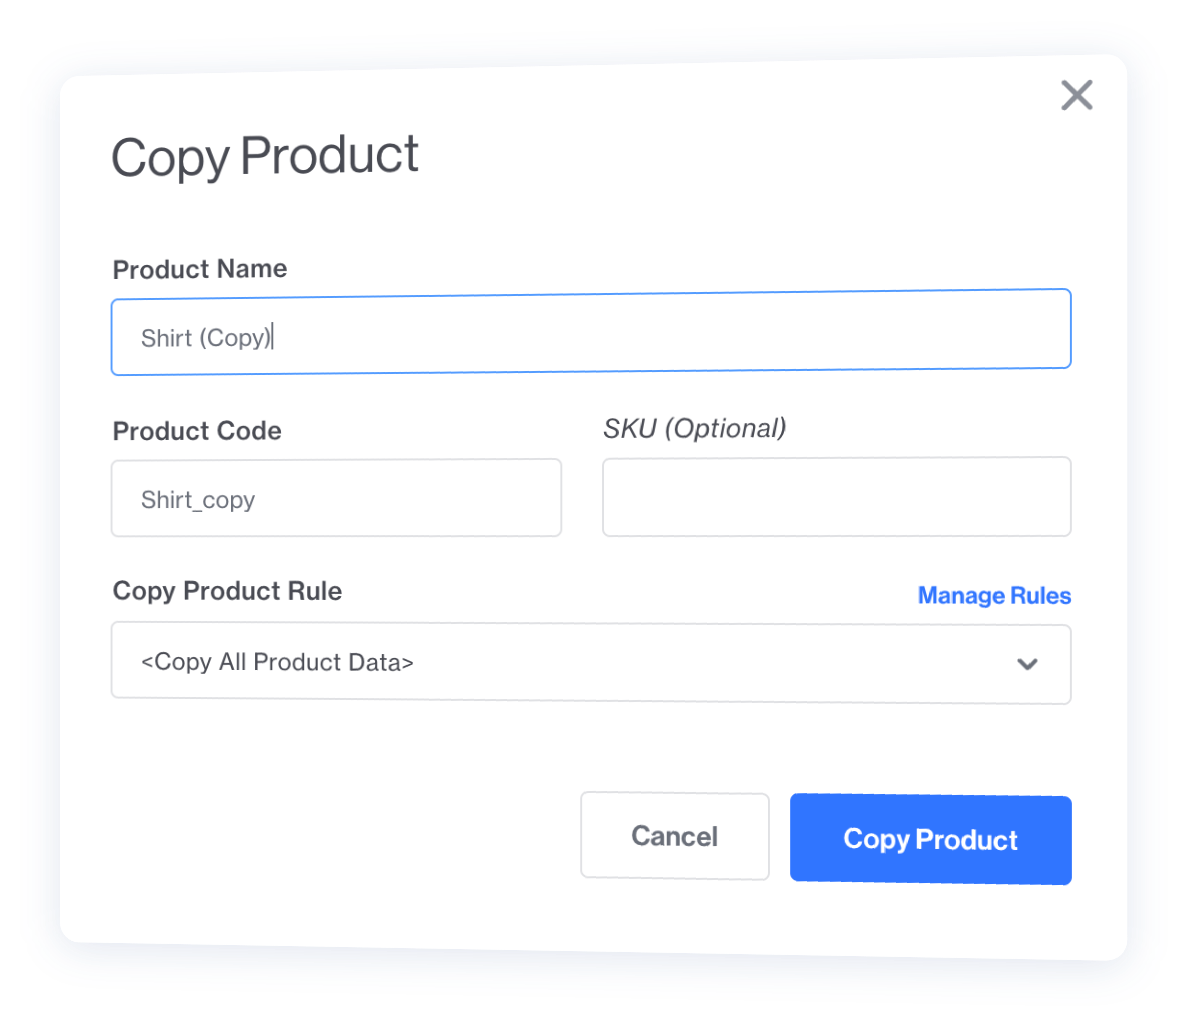 Copy Product dialog. Has product name, code, sku, and Product Rule options.